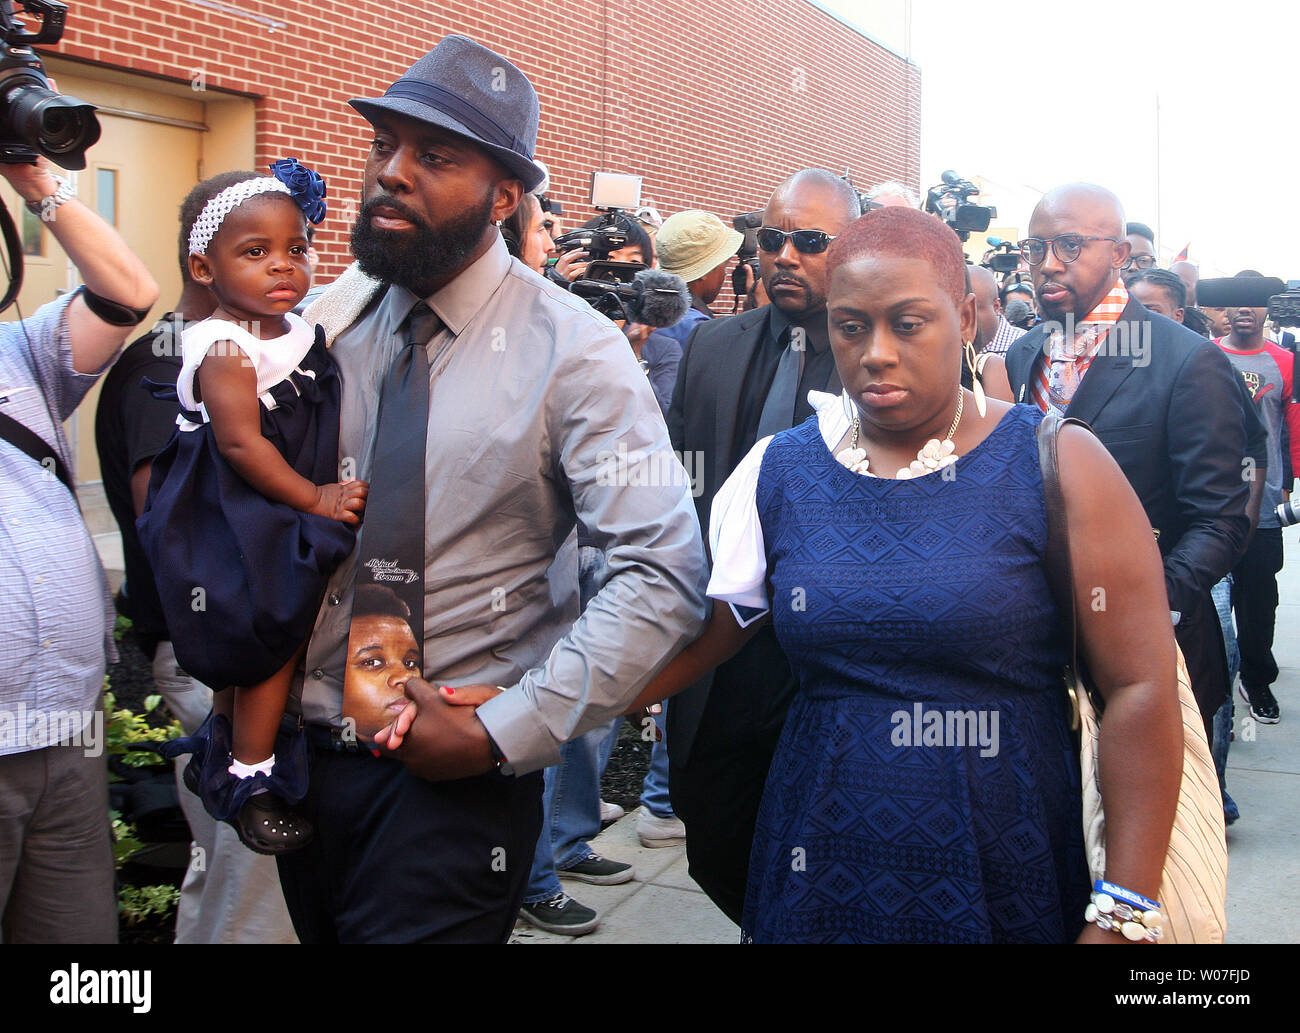 Michael Brown Sr. arrives at the Friendly Temple Missionary Baptist Church for the funeral of his son Michael Brown in St. Louis on August 25, 2014. Brown gained attention after being shot by a white Ferguson, Missouri police officer on August 9 and was unarmed. The shooting led to several nights of looting, arrests and heavy police presence.   UPI/Bill Greenblatt Stock Photo